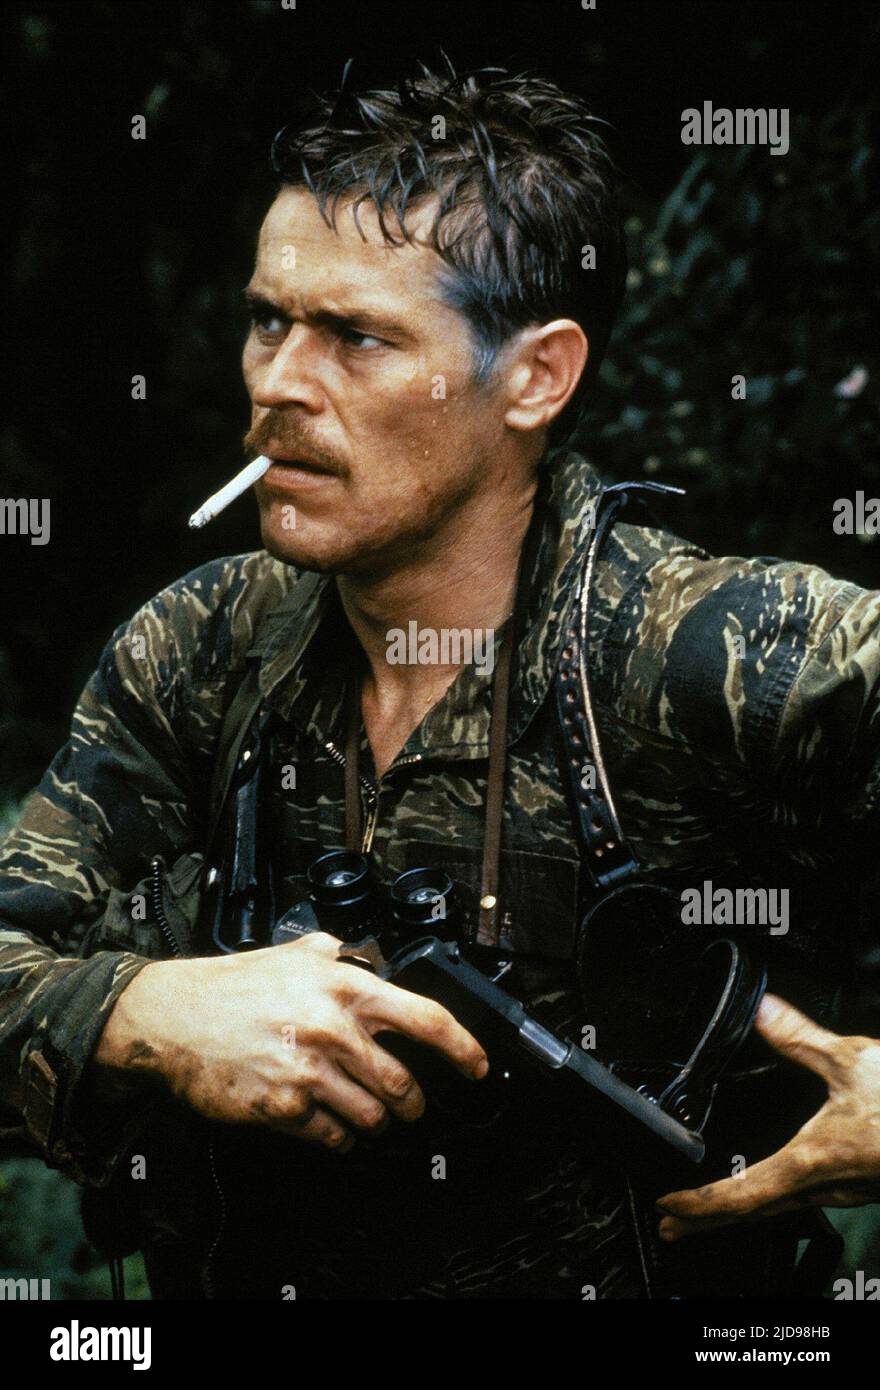 WILLEM DAFOE, FLIGHT OF THE INTRUDER, 1991, ©PARAMOUNT PICTURES Stock Photo